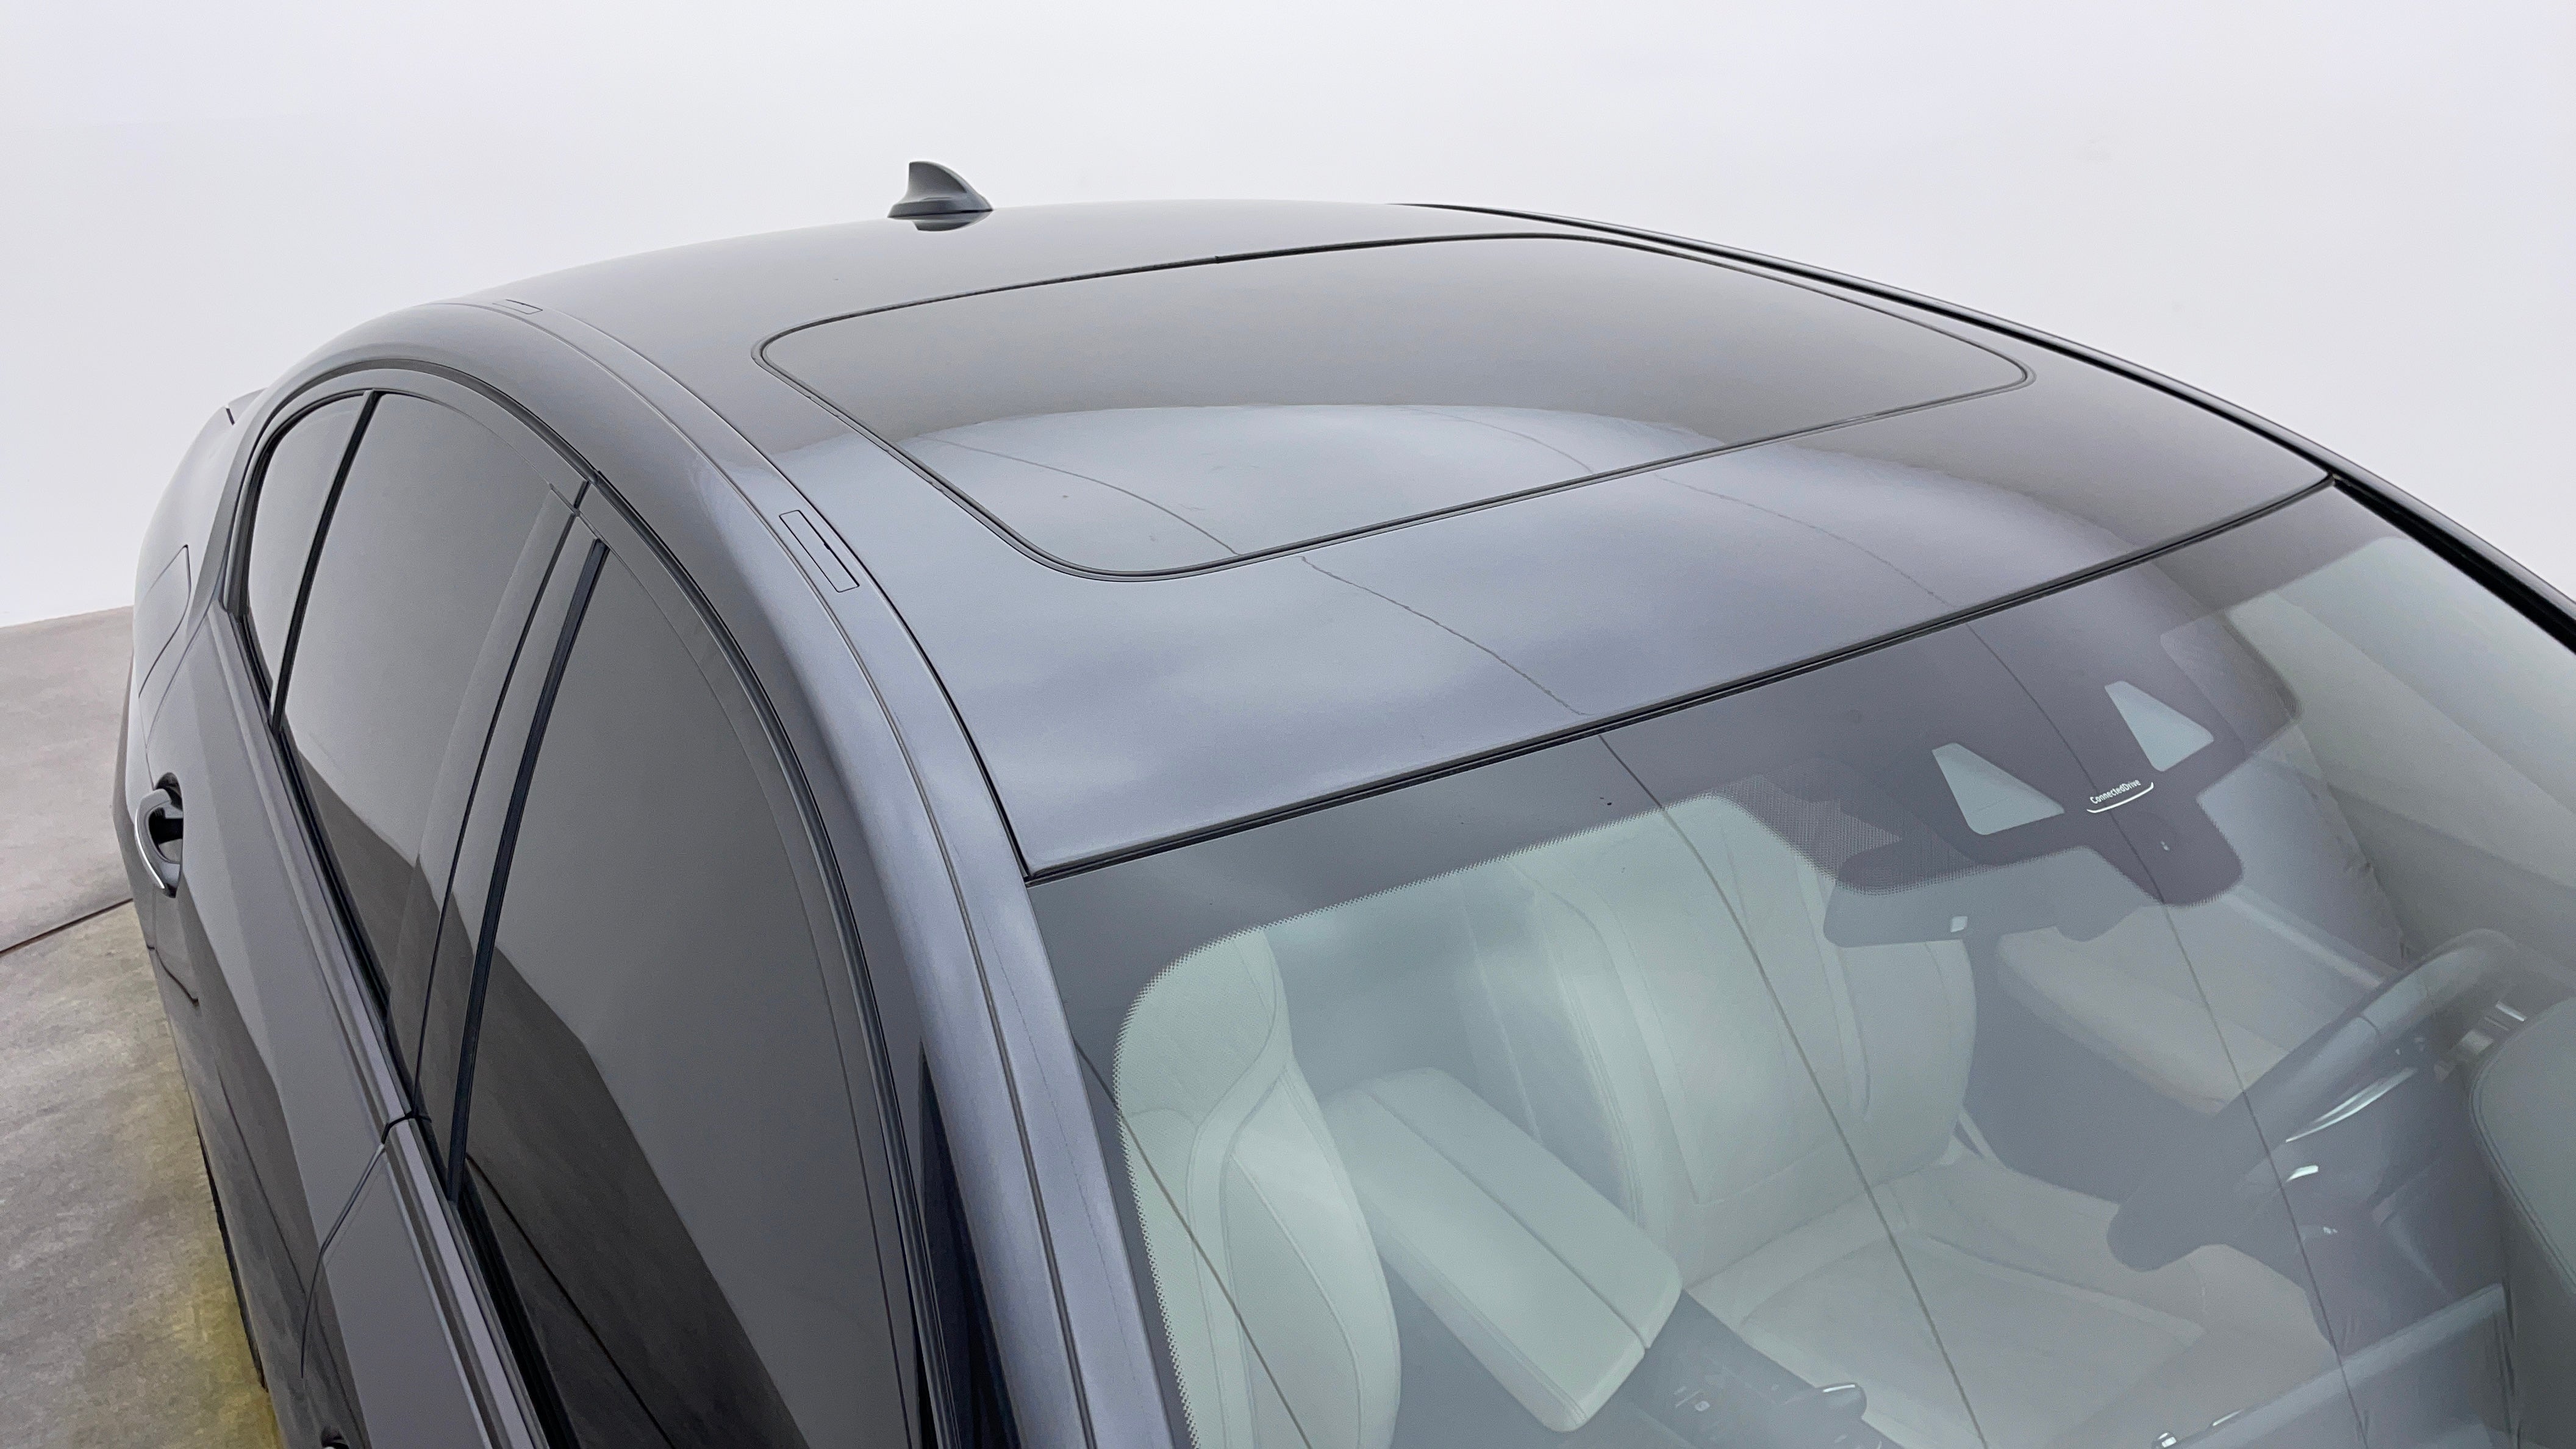 BMW 5 Series-Roof/Sunroof View